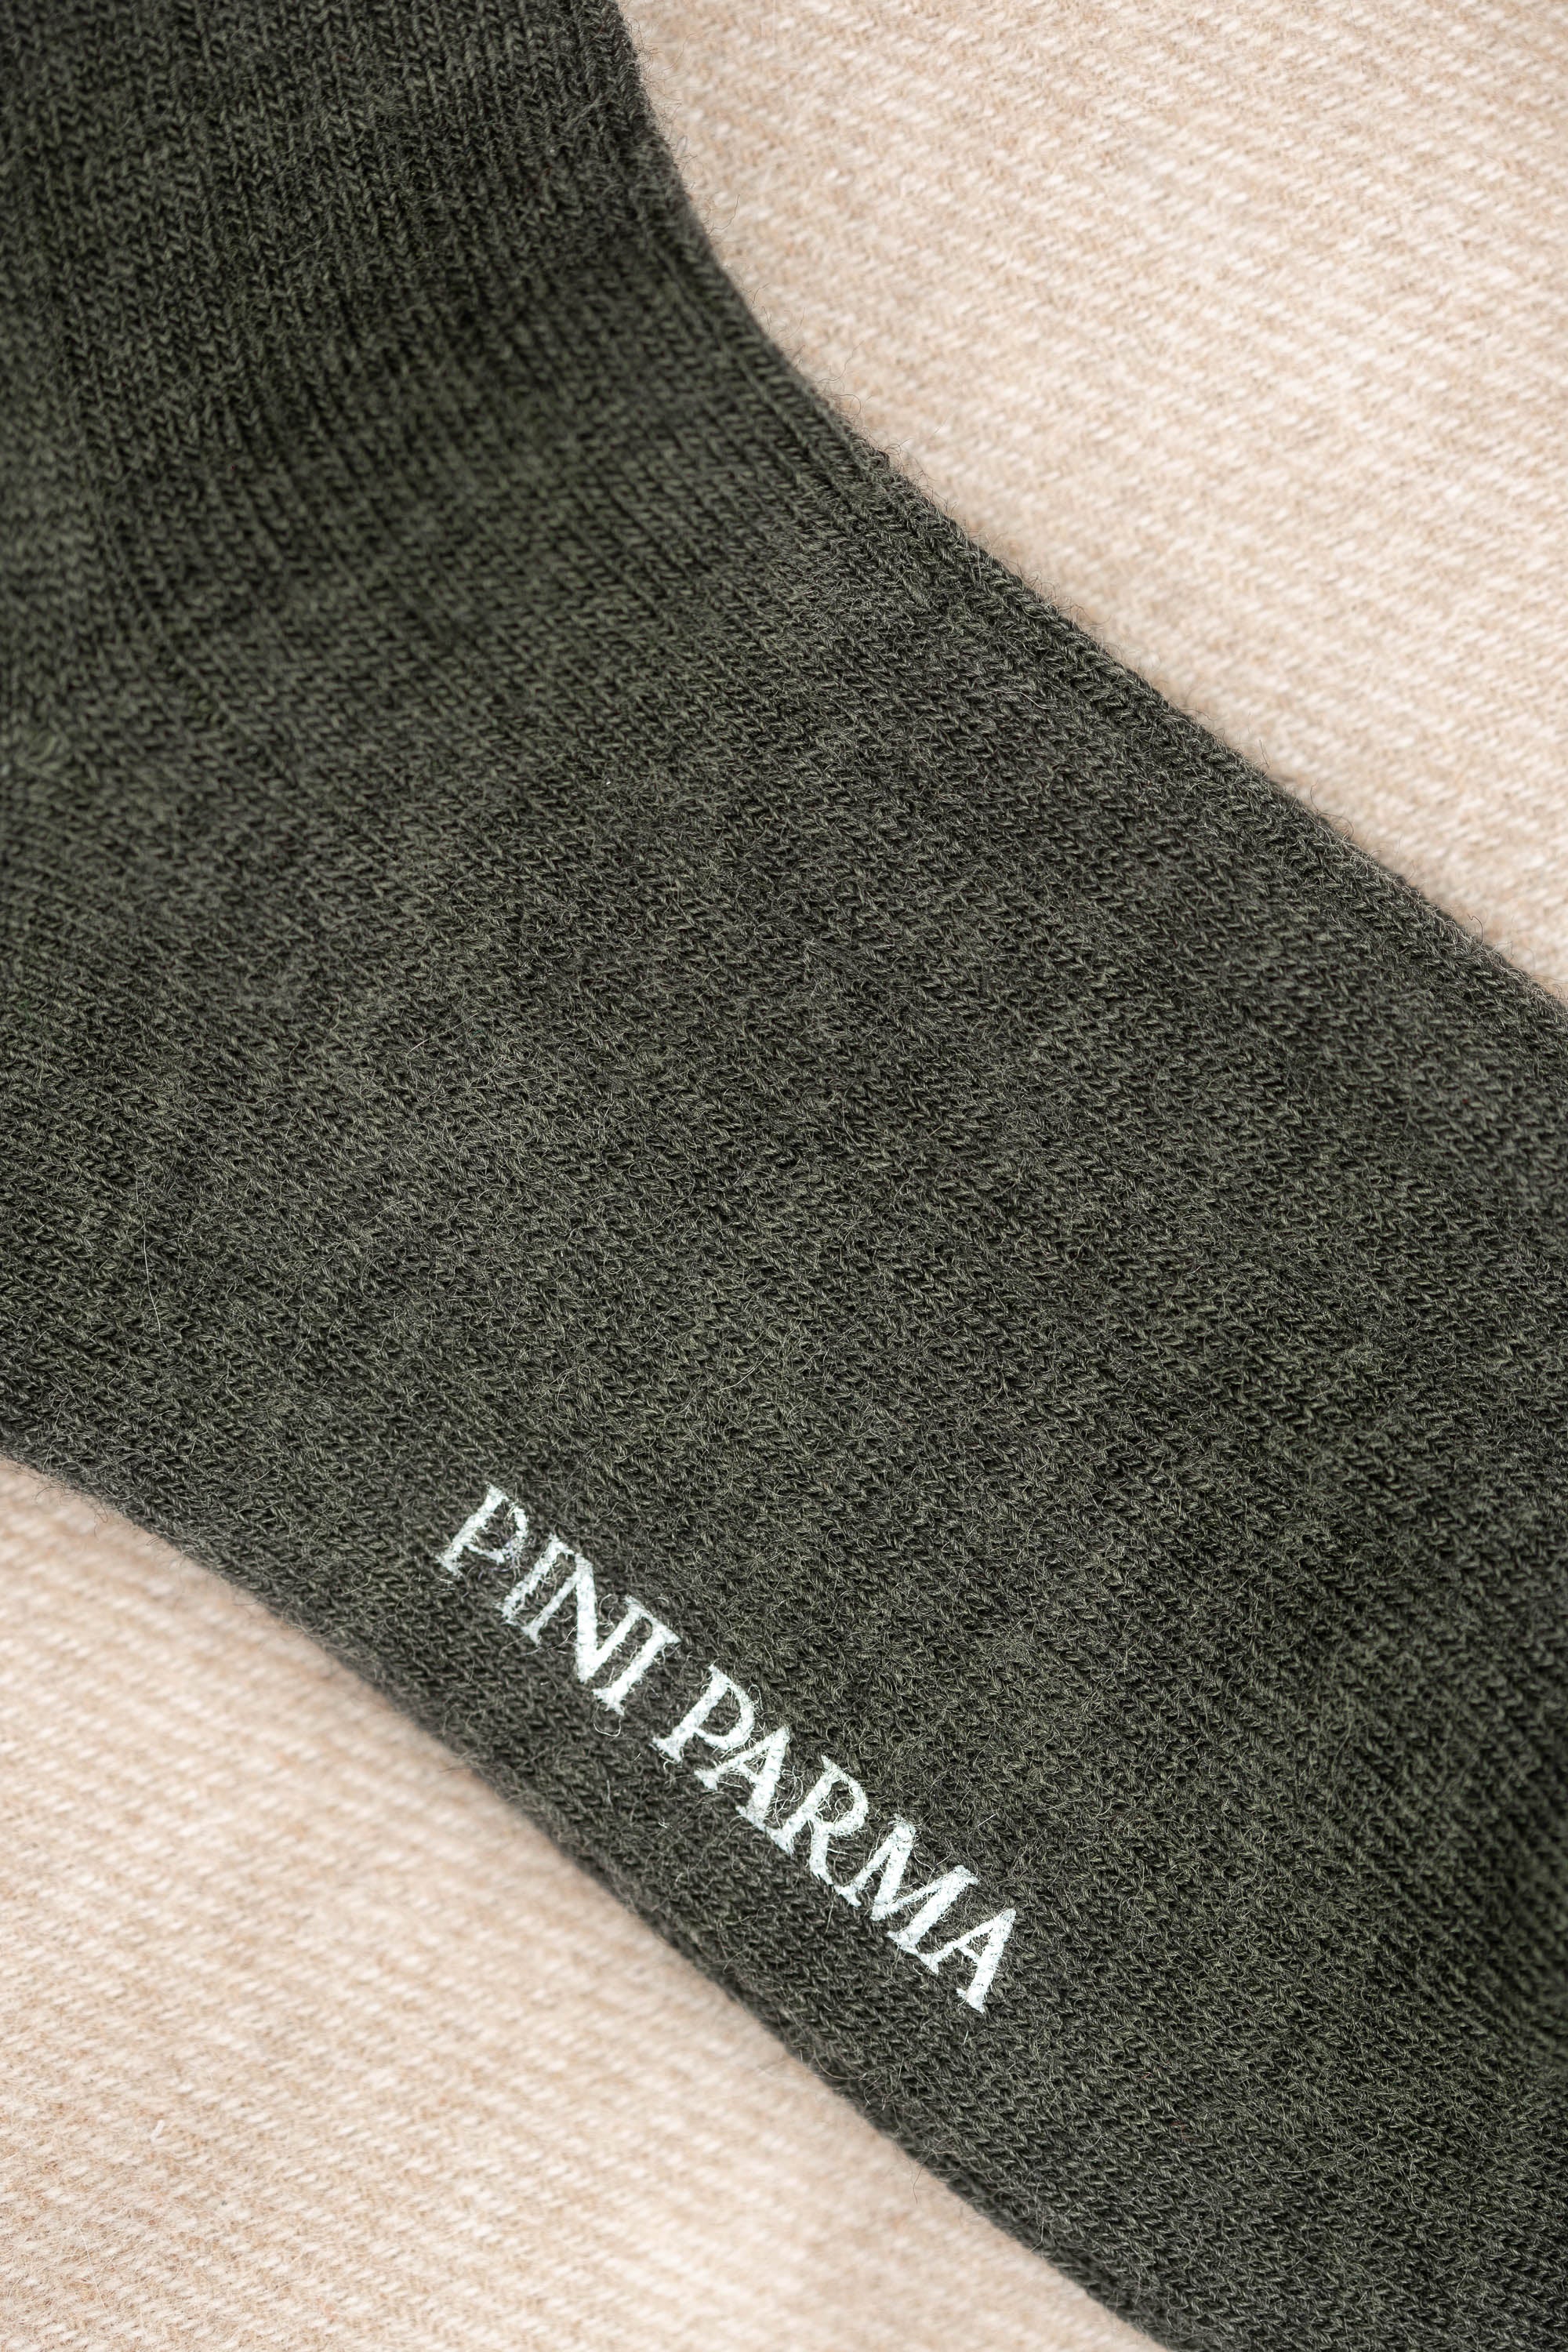 Green - Super durable Wool short socks - Made in Italy